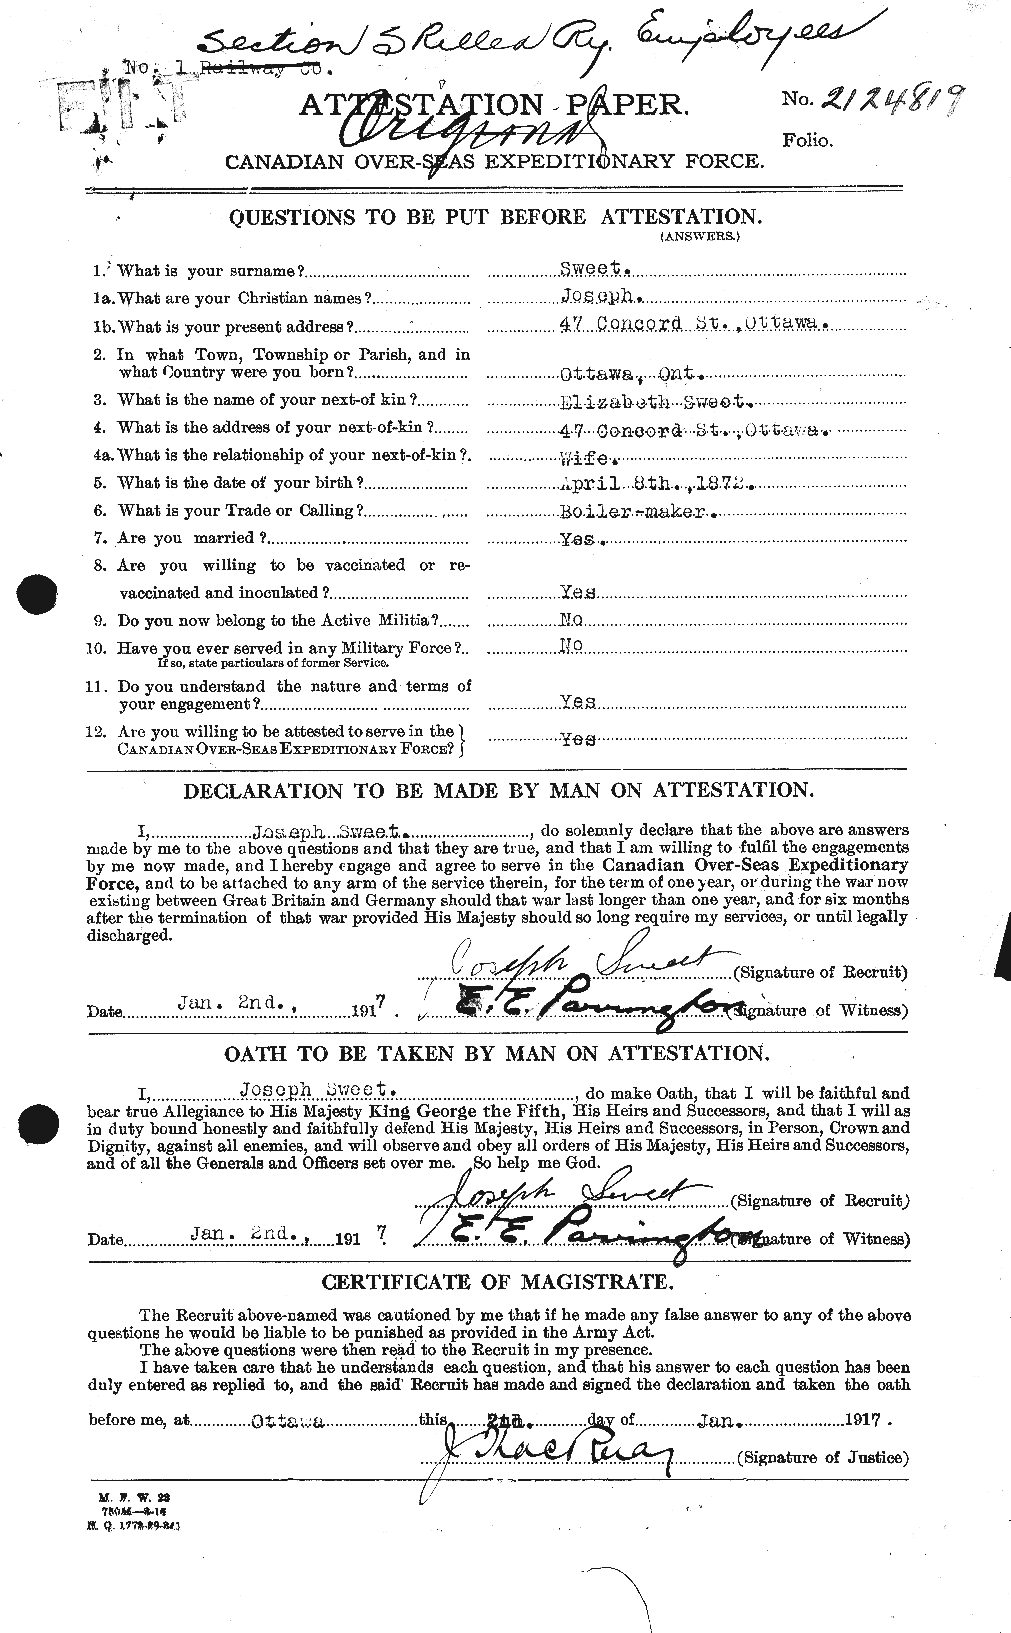 Personnel Records of the First World War - CEF 129420a